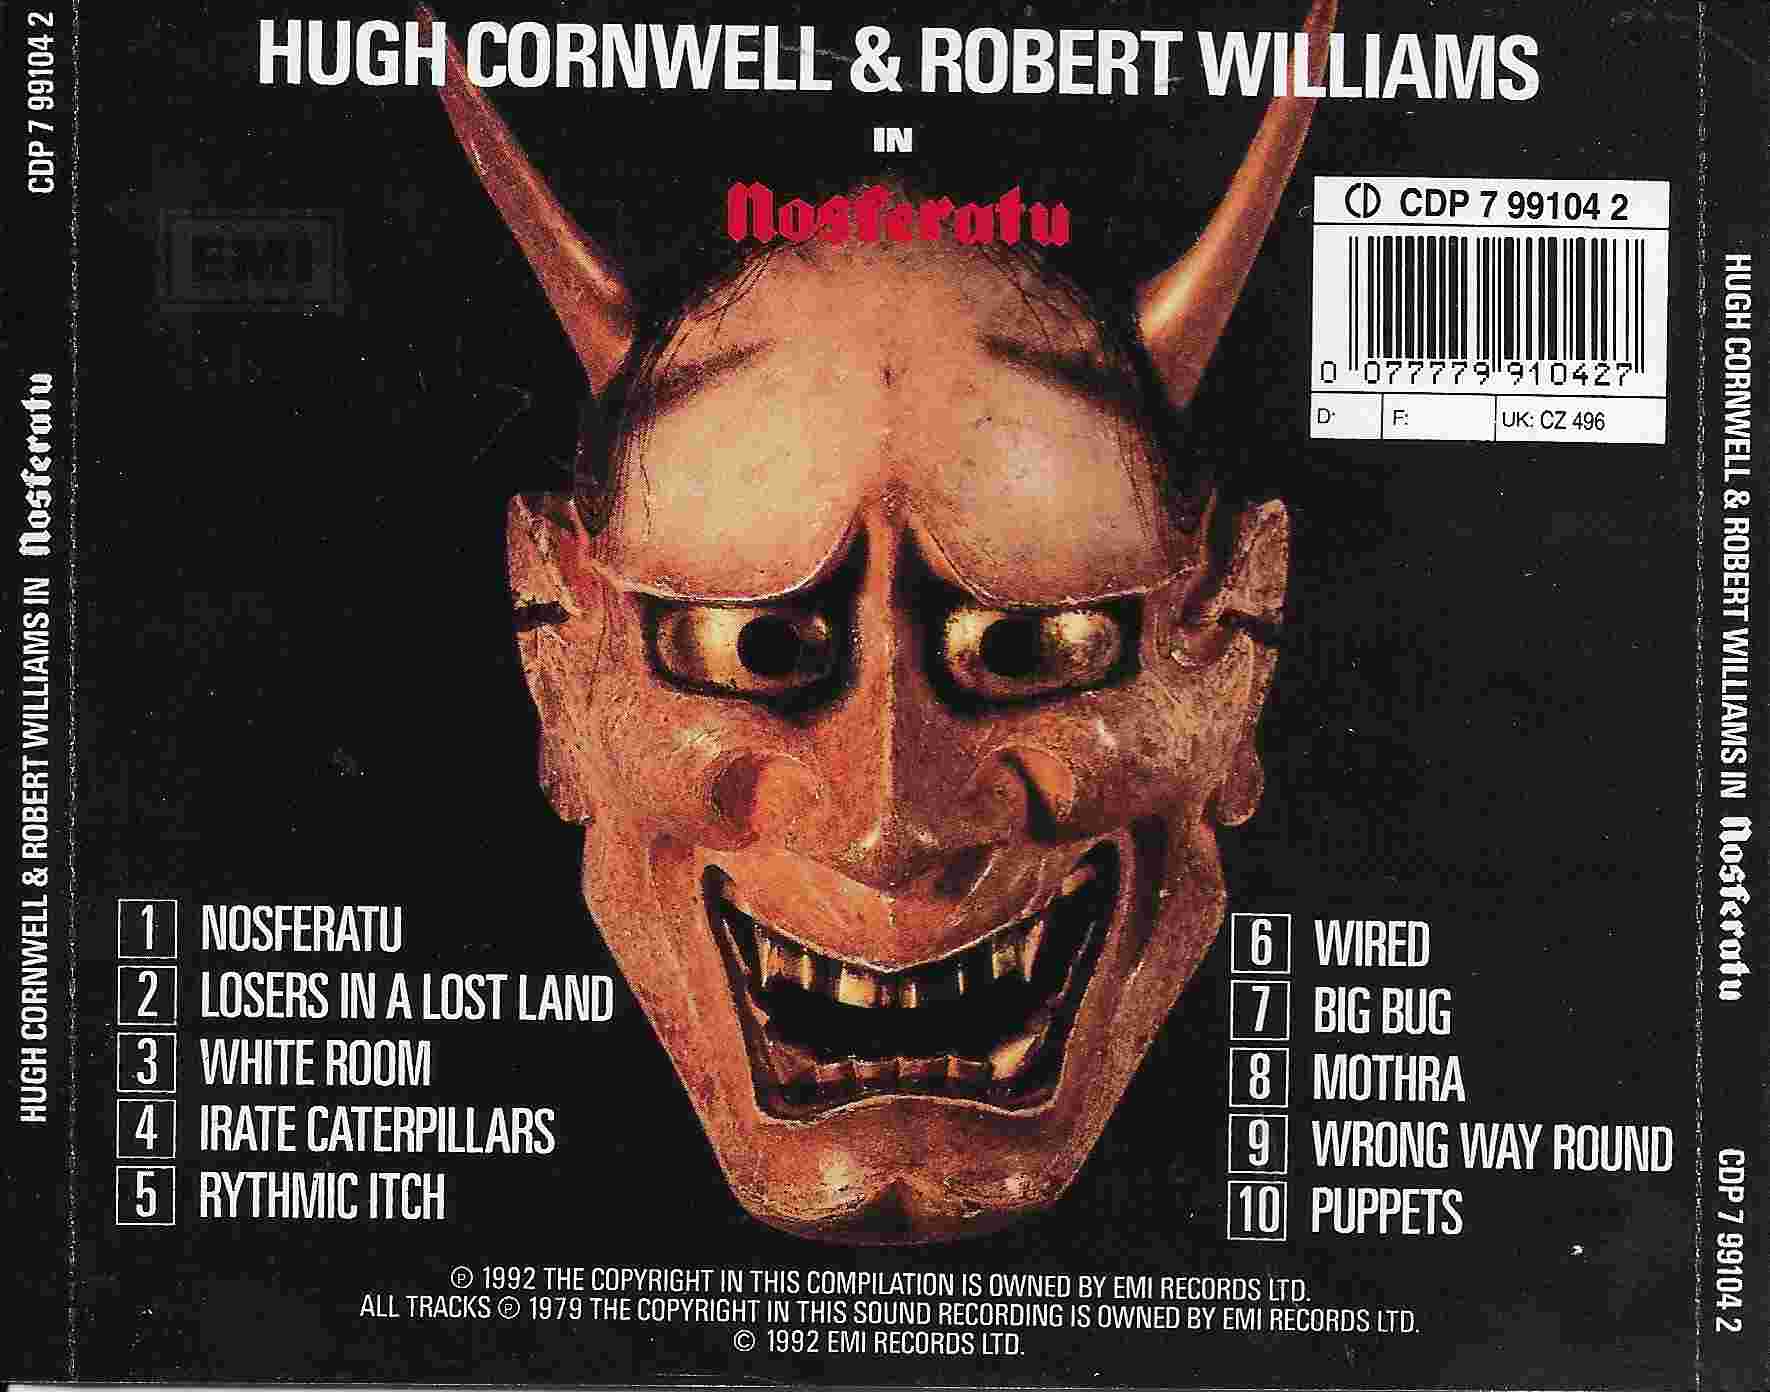 Picture of CDP 799104 2 Nosferatu (With Robert Williams) by artist Hugh Cornwell from The Stranglers